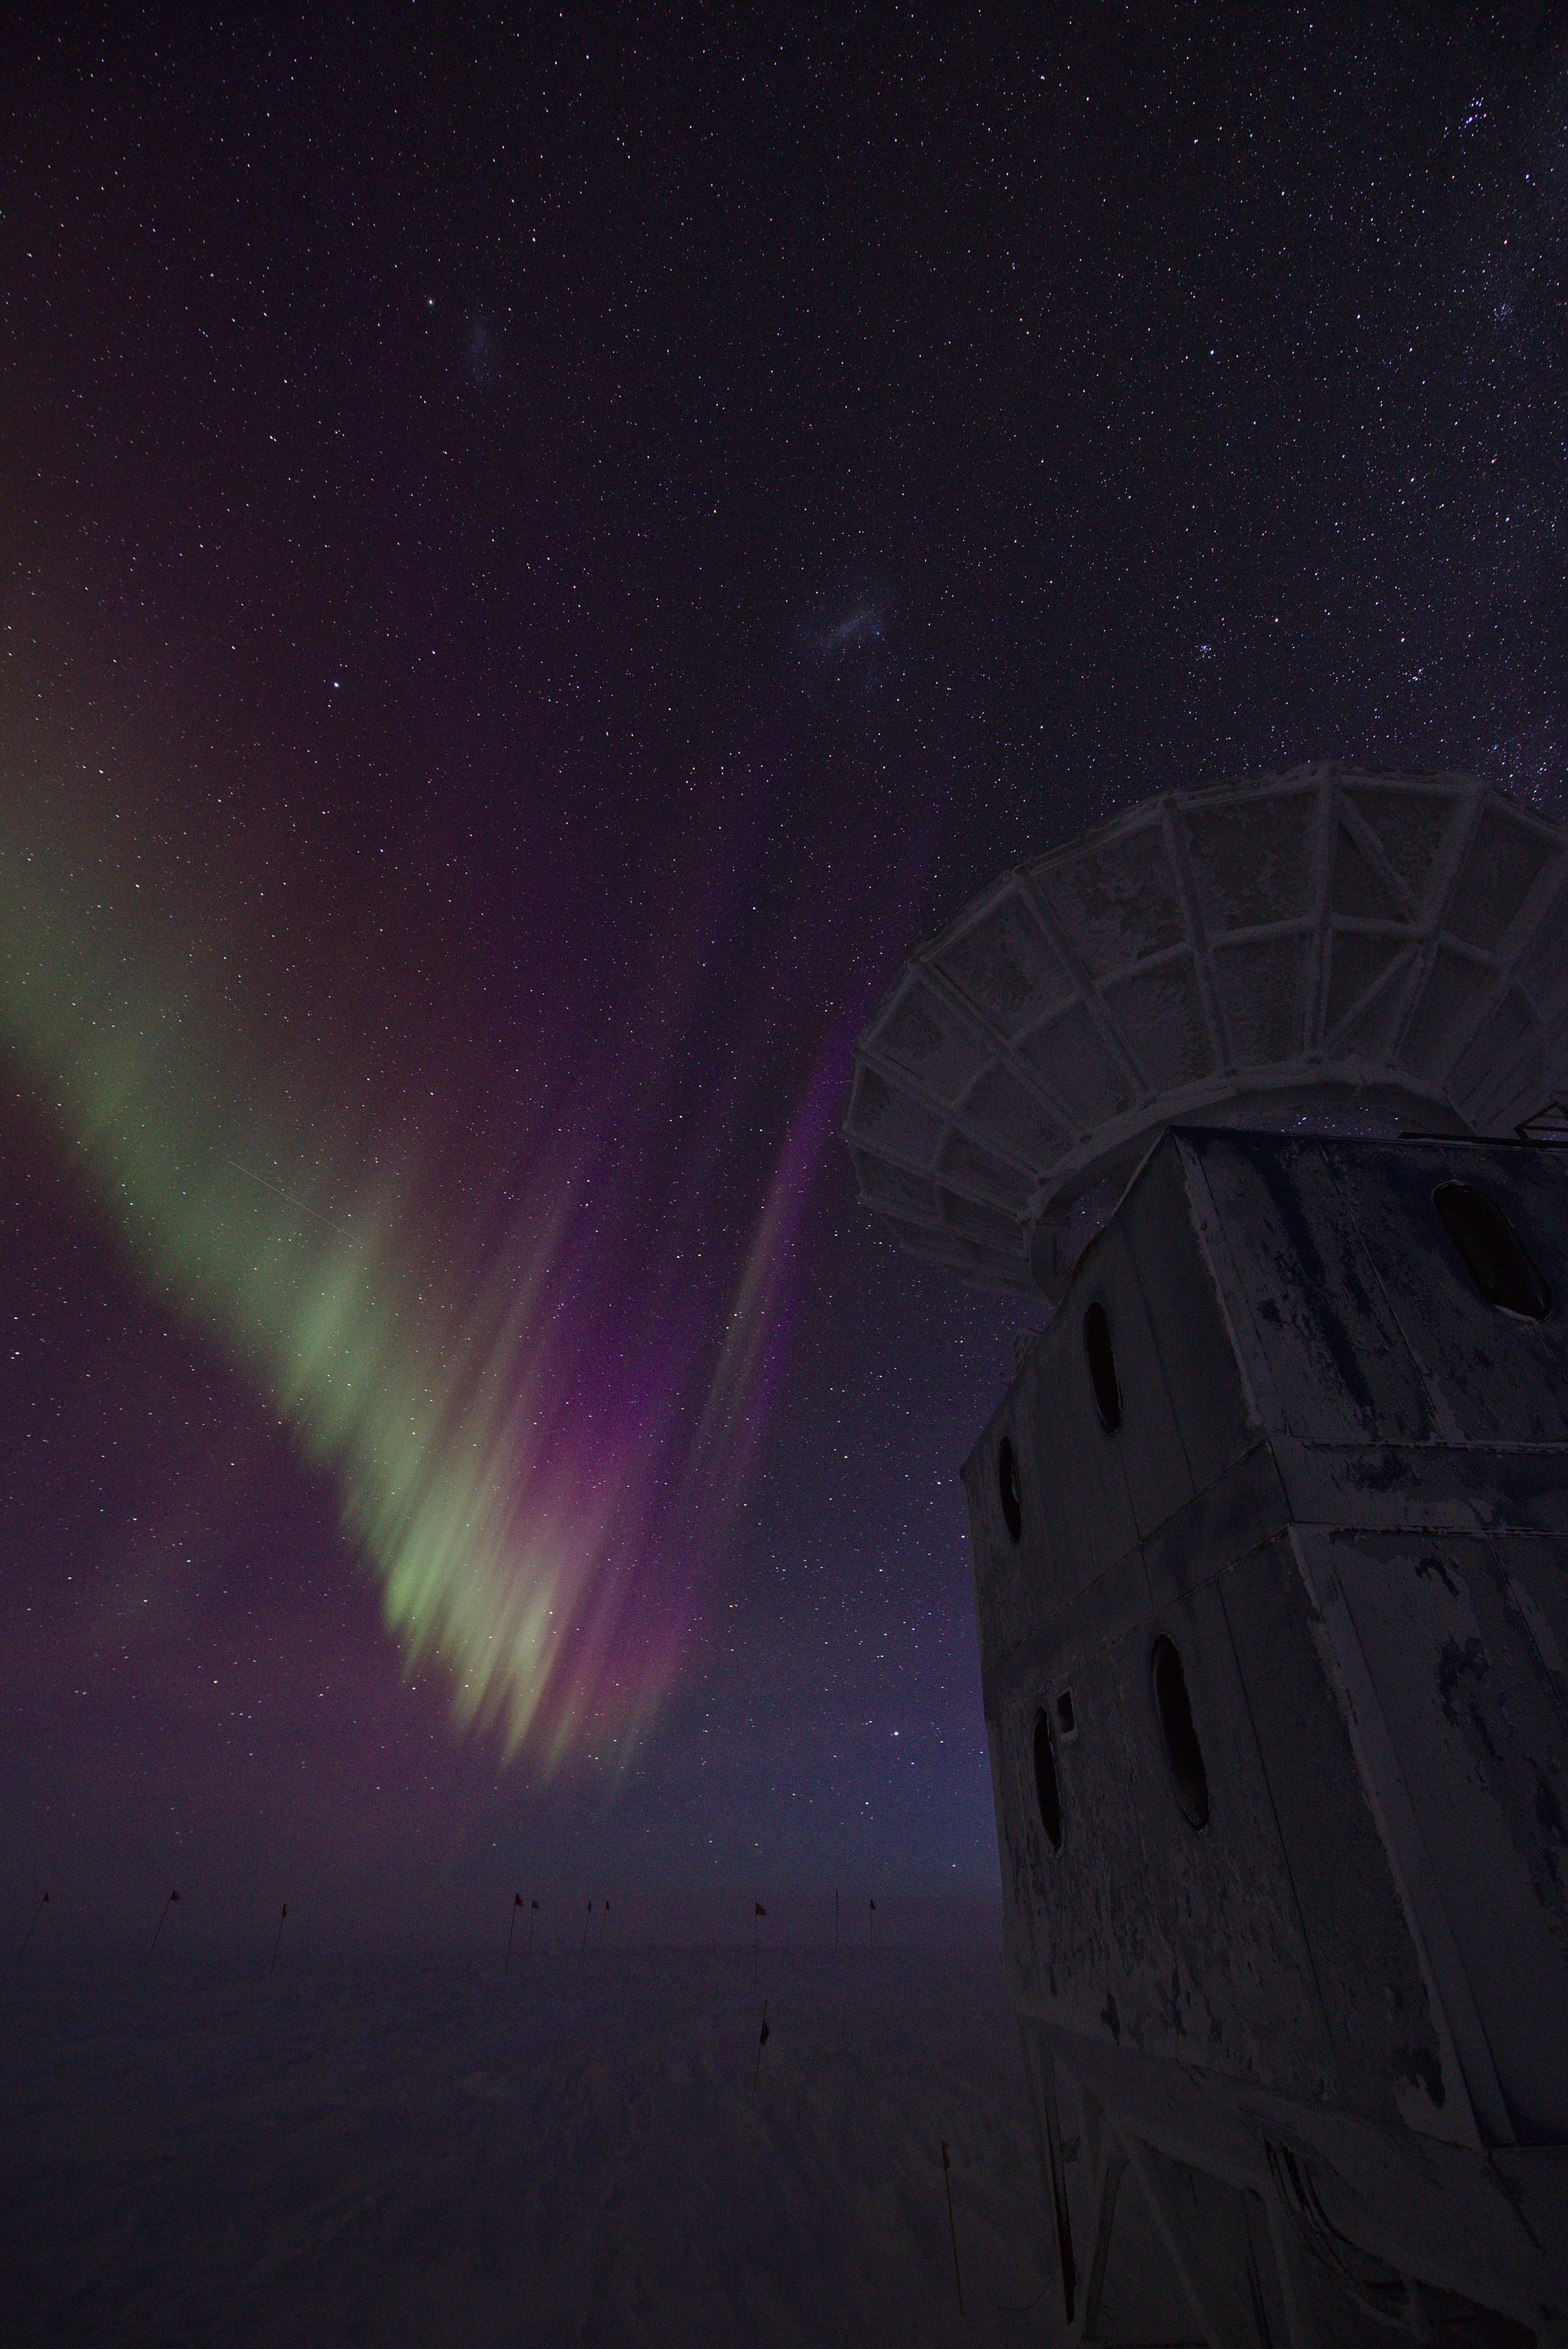 The BICEP telescope ground shield below the starry skies